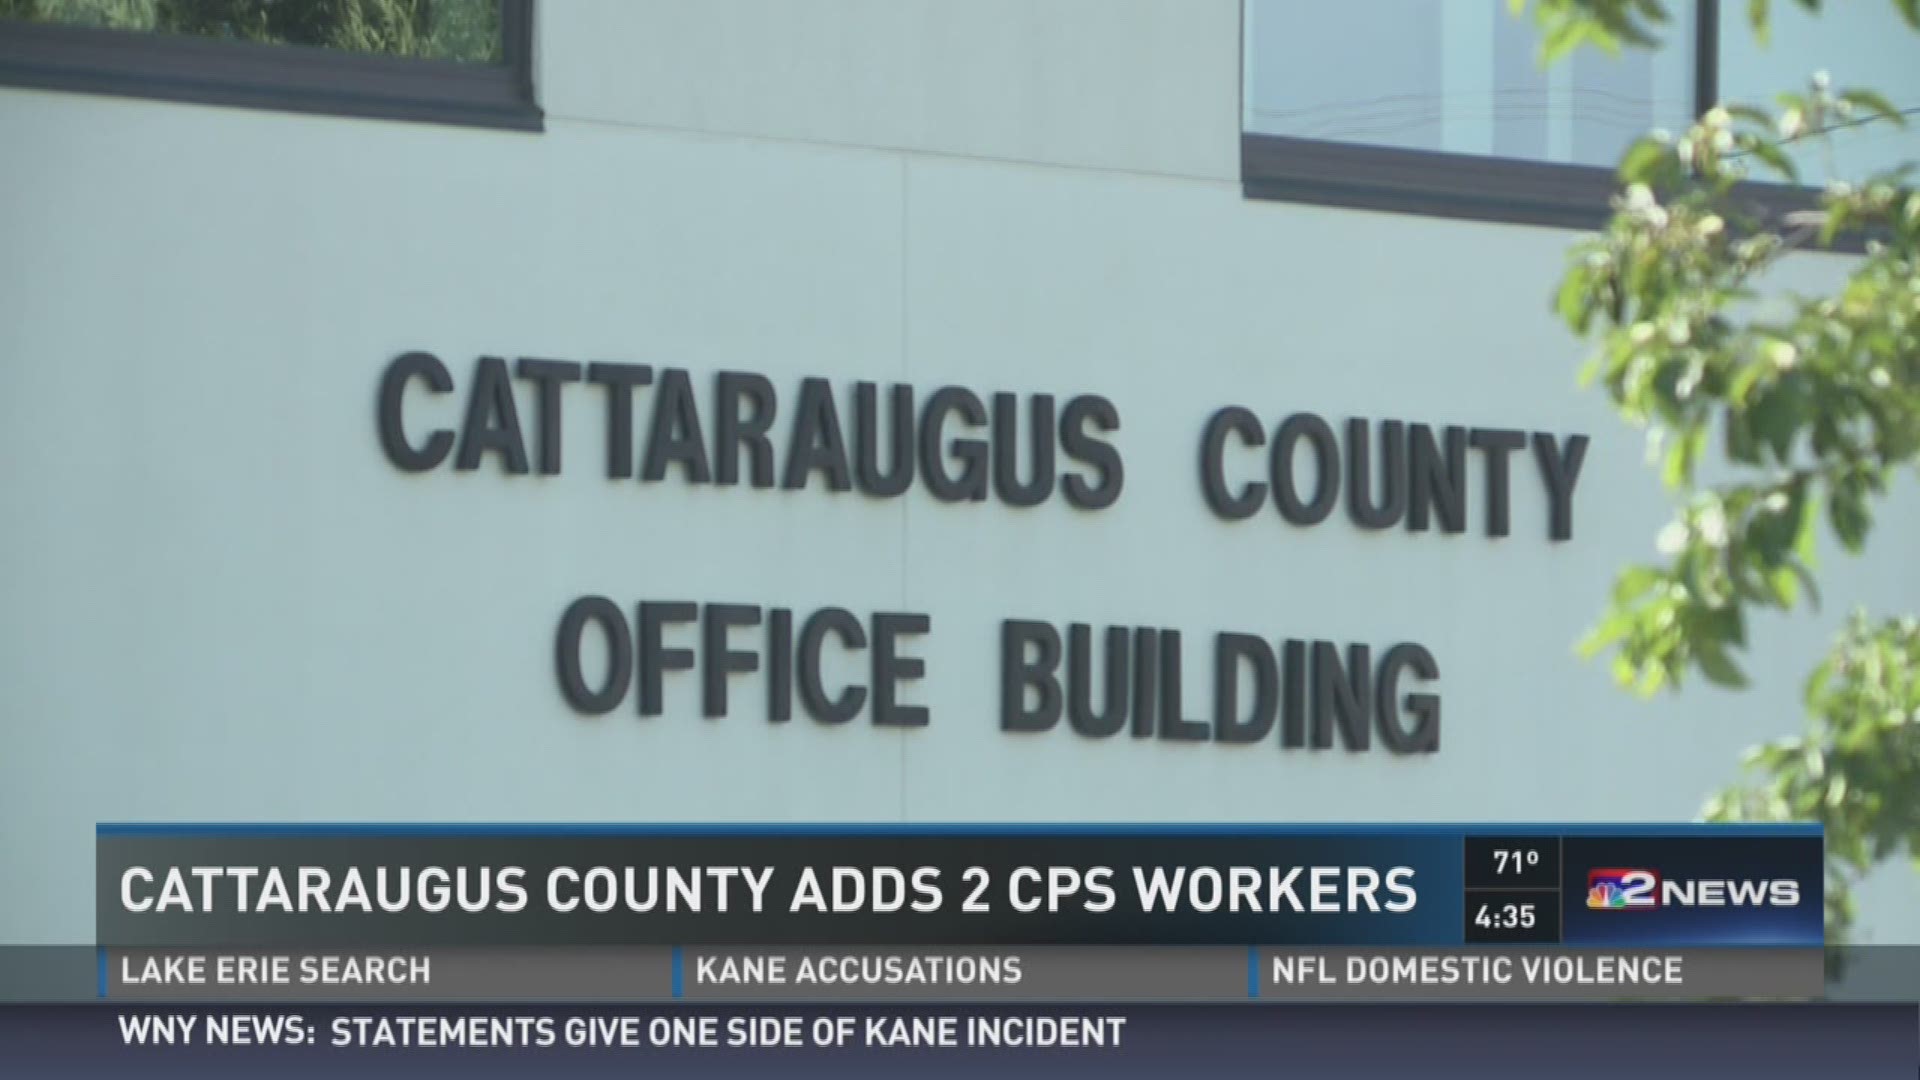 Two new CPS workers will be added to Cattaraugus Co. staff